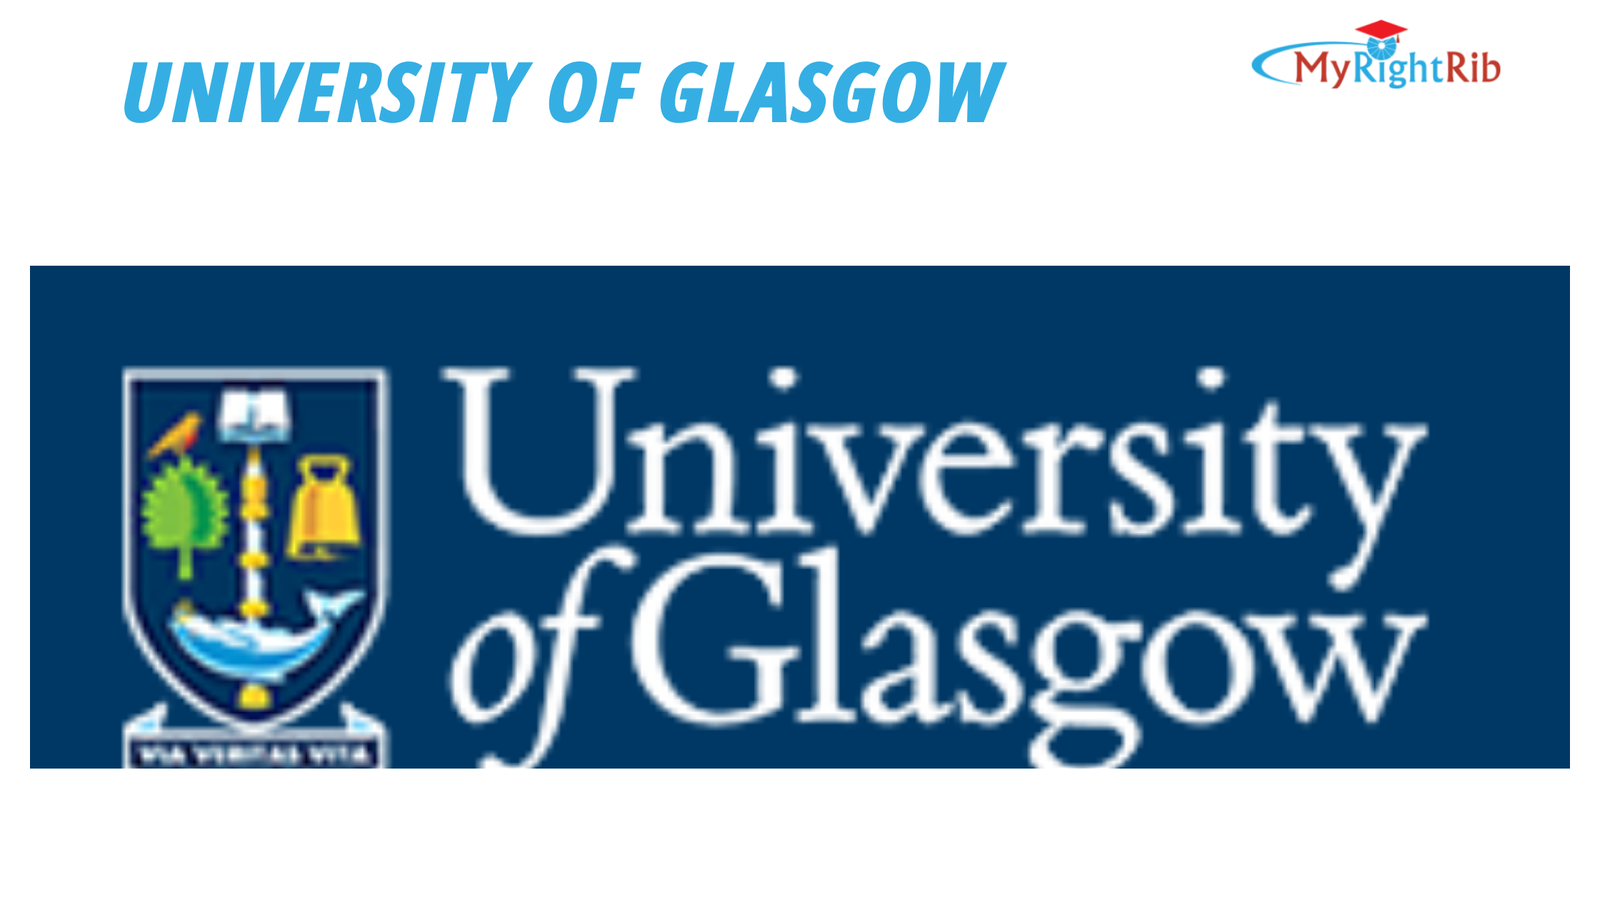 University of Glasgow Overview